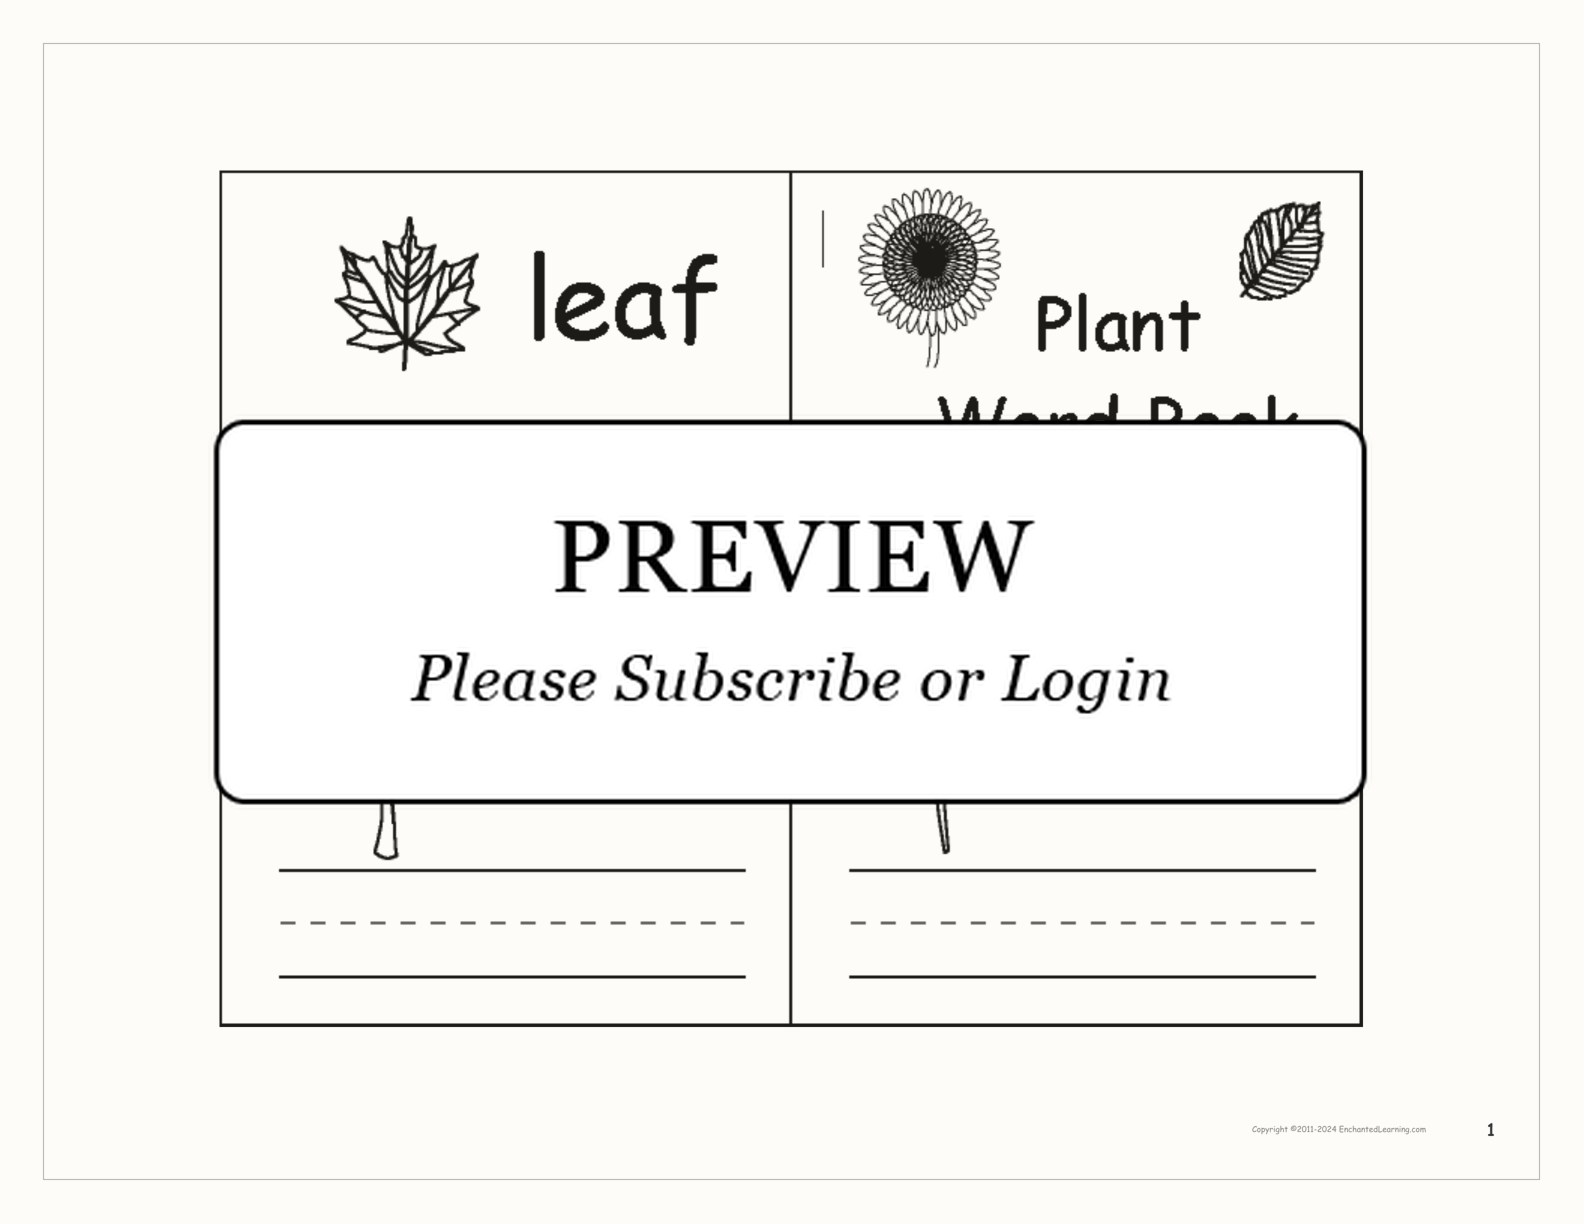 Plant Word Book interactive printout page 1